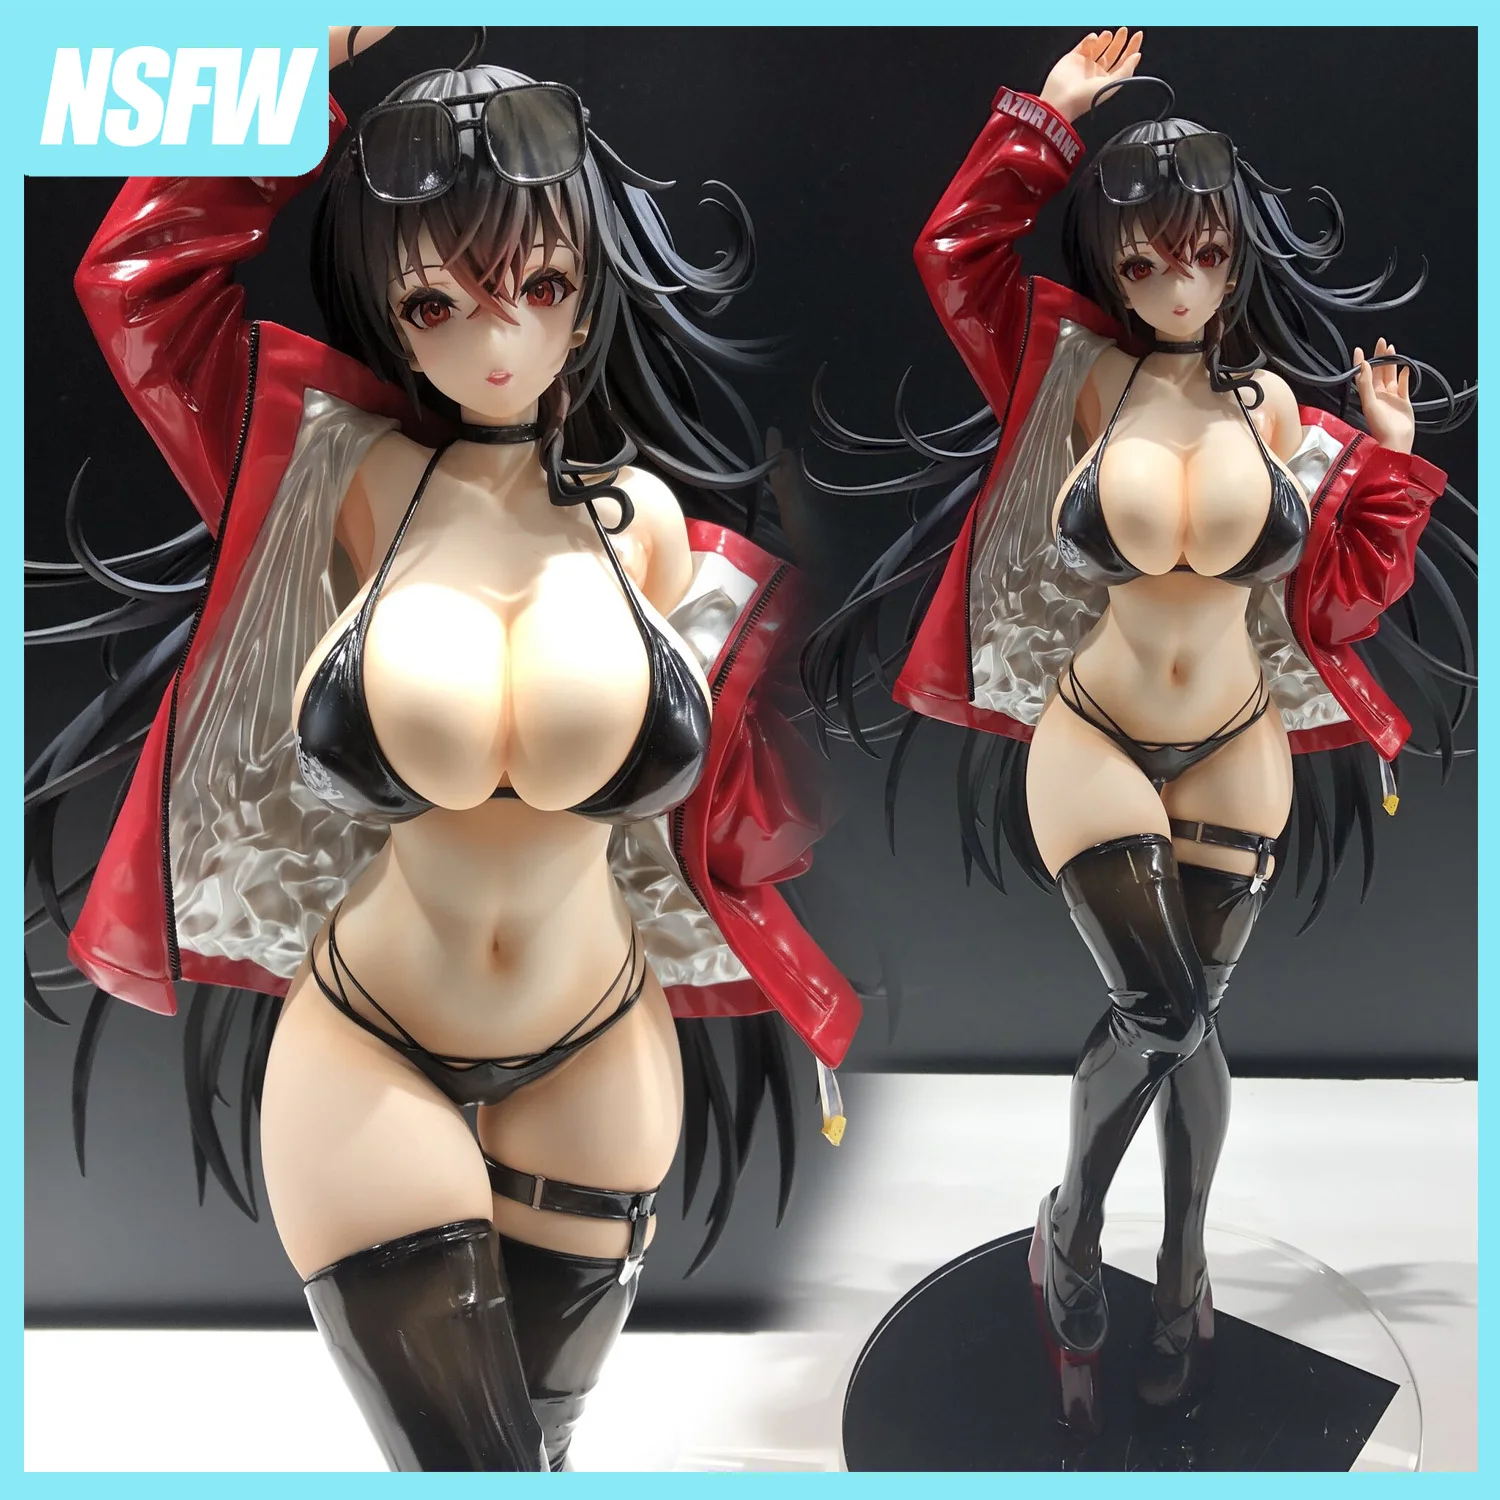 

NSFW Azur Lane Taihou 1/6 Enraptured Companion Anime Girl PVC Action Figure Toy Game Statue Adult Collection Model Doll Gifts